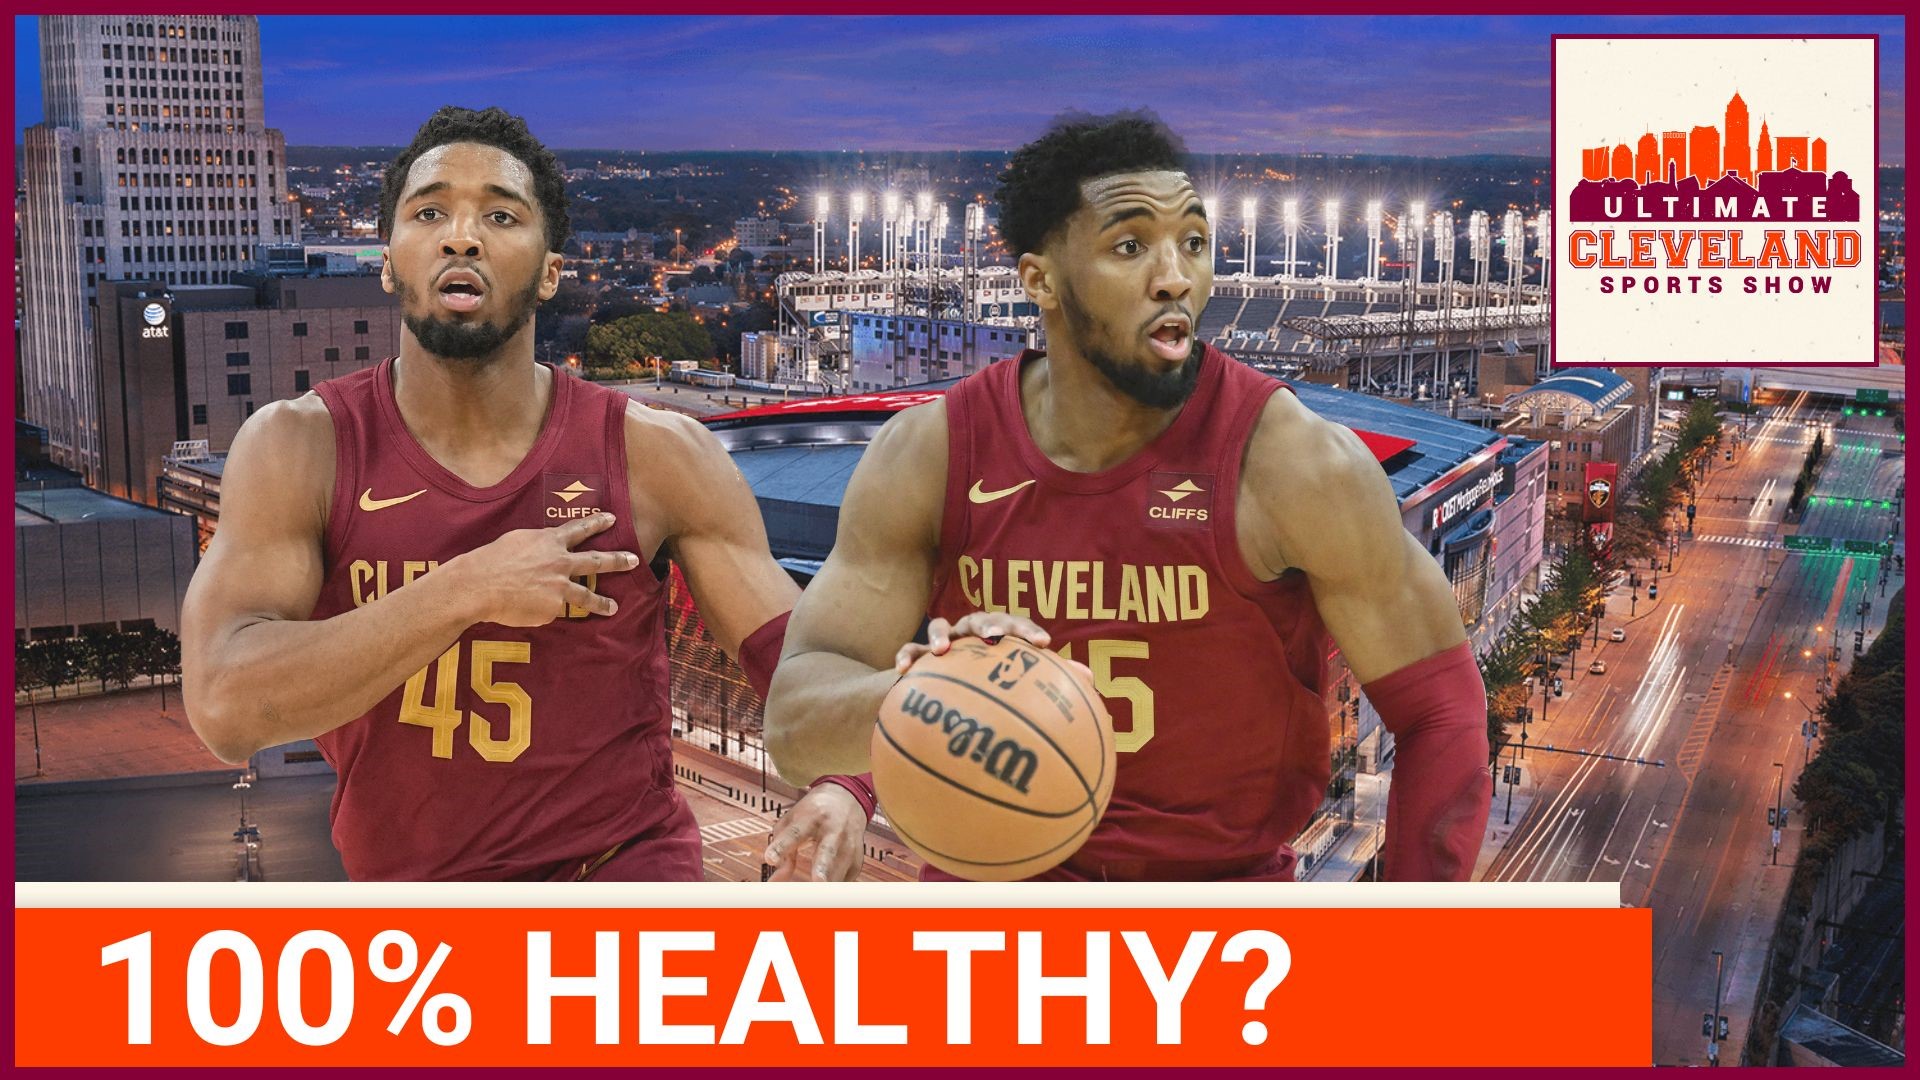 Cleveland Cavaliers star Donovan Mitchell says he's 100% healthy and ready to go for his team's first round series against the Orlando Magic.